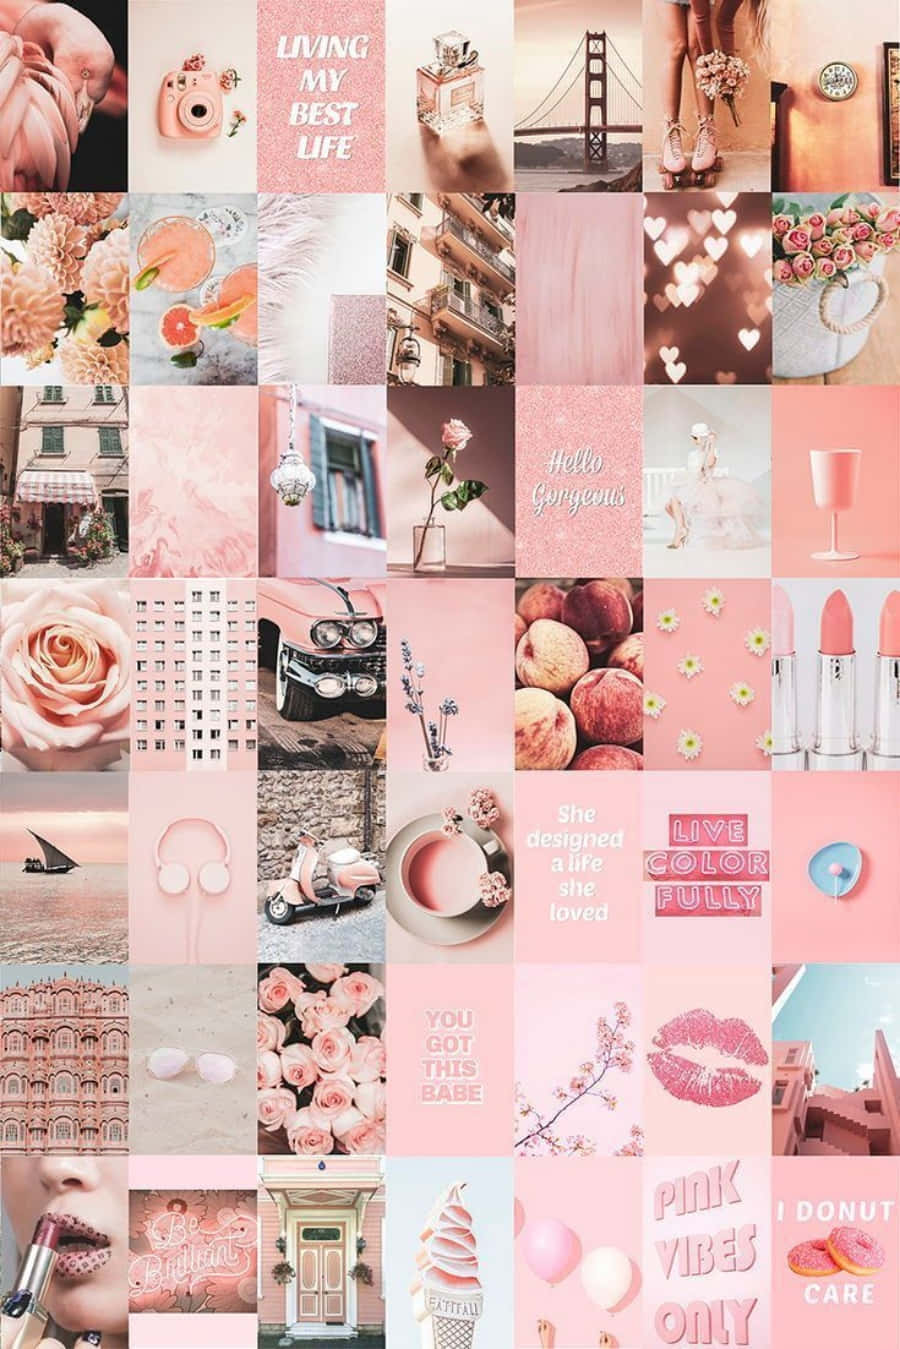 Enjoy This Beautiful Aesthetic Pink Collage To Bring A Little Extra Color And Style To Your World.